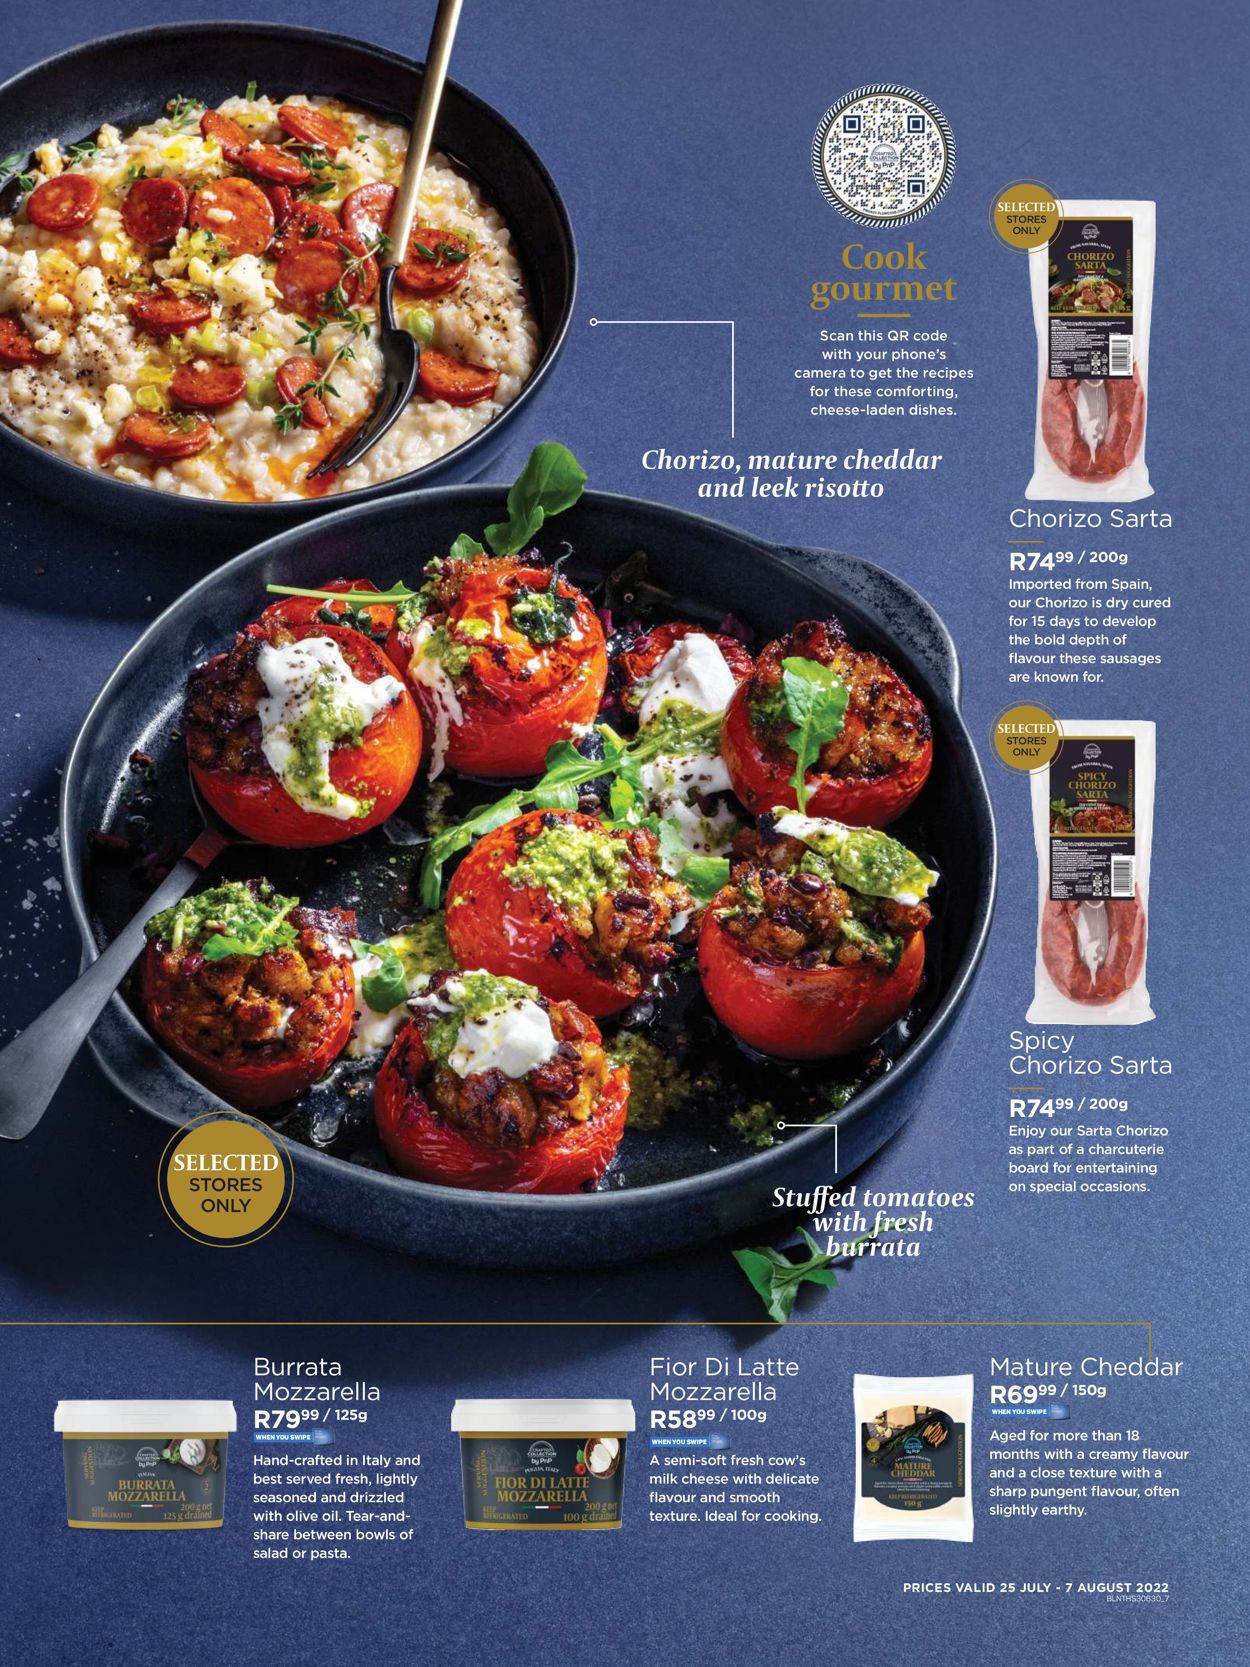 Pick n Pay Catalogue - 2022/07/25-2022/08/07 (Page 7)